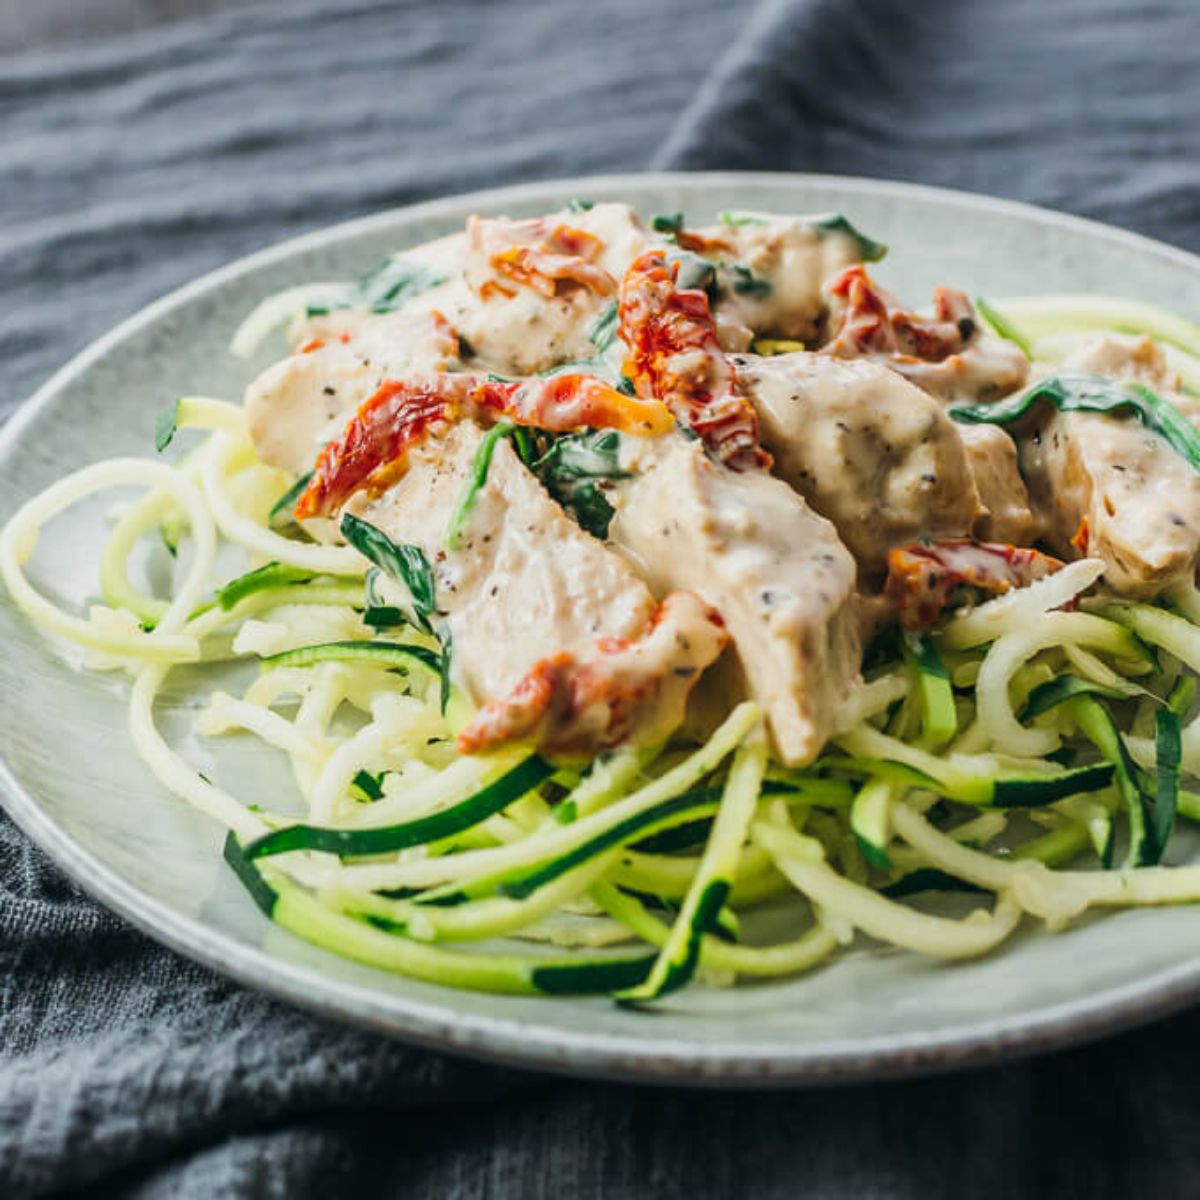 On a dark gray cloth is a white plate. On the plate is a pile of courgetti and then chiken in a creamy sauce with sundried tomatoes